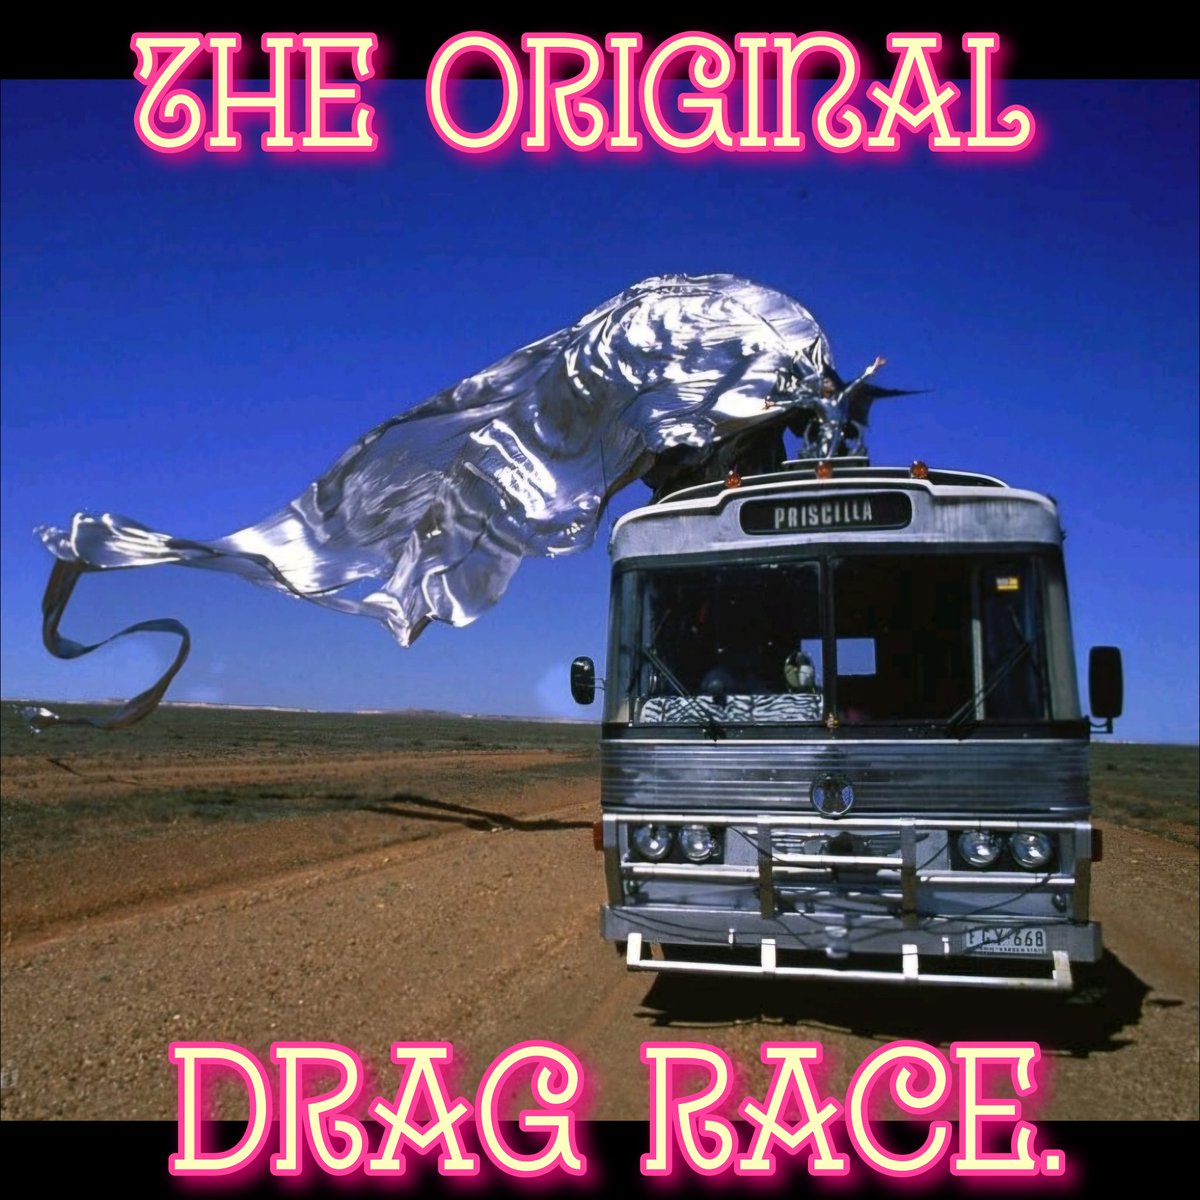 It's time for our next #StrangeImports movie, this time we travel to #Australia to get fabulous and watch the cult-classic #TheAdventuresOfPriscillaQueenOfTheDesert. Join us Friday!
#podcast #HugoWeaving #GuyPearce #TerenceStamp #BillHunter #SarahChadwick #MarkHolmes #JuliaCortez